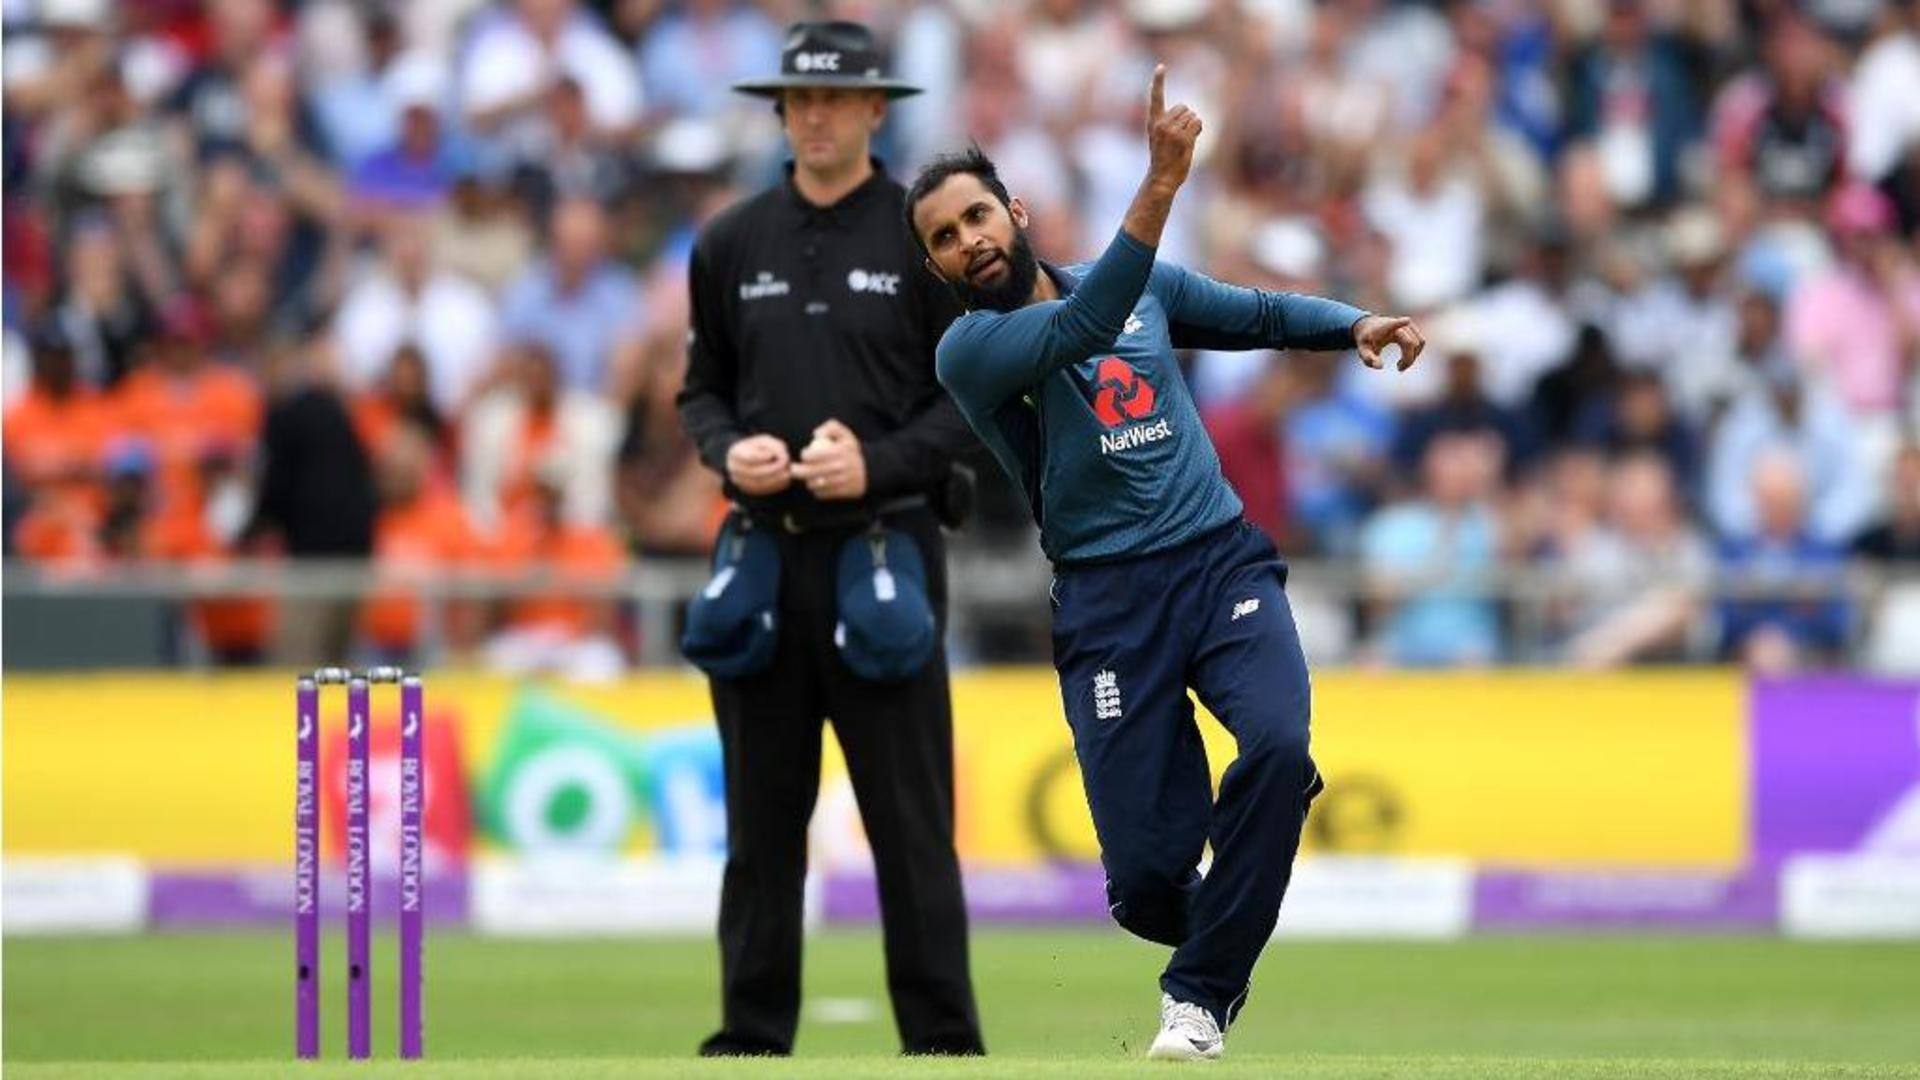 Adil Rashid becomes England's fourth-highest wicket-taker in ODIs: Key stats